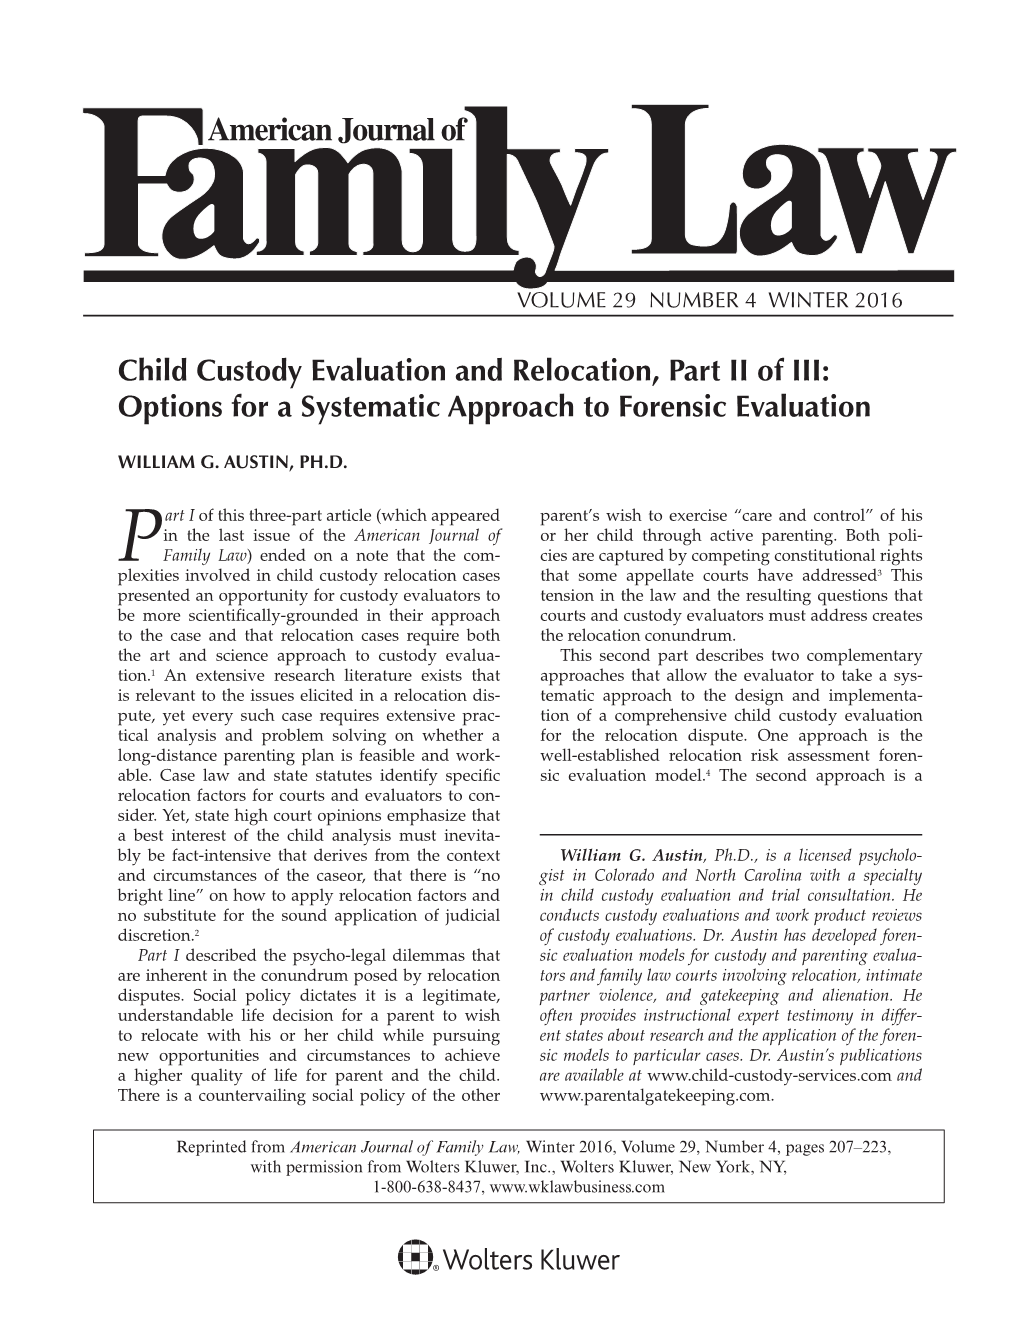 Child Custody Evaluation and Relocation, Part II of III: Options for a Systematic Approach to Forensic Evaluation